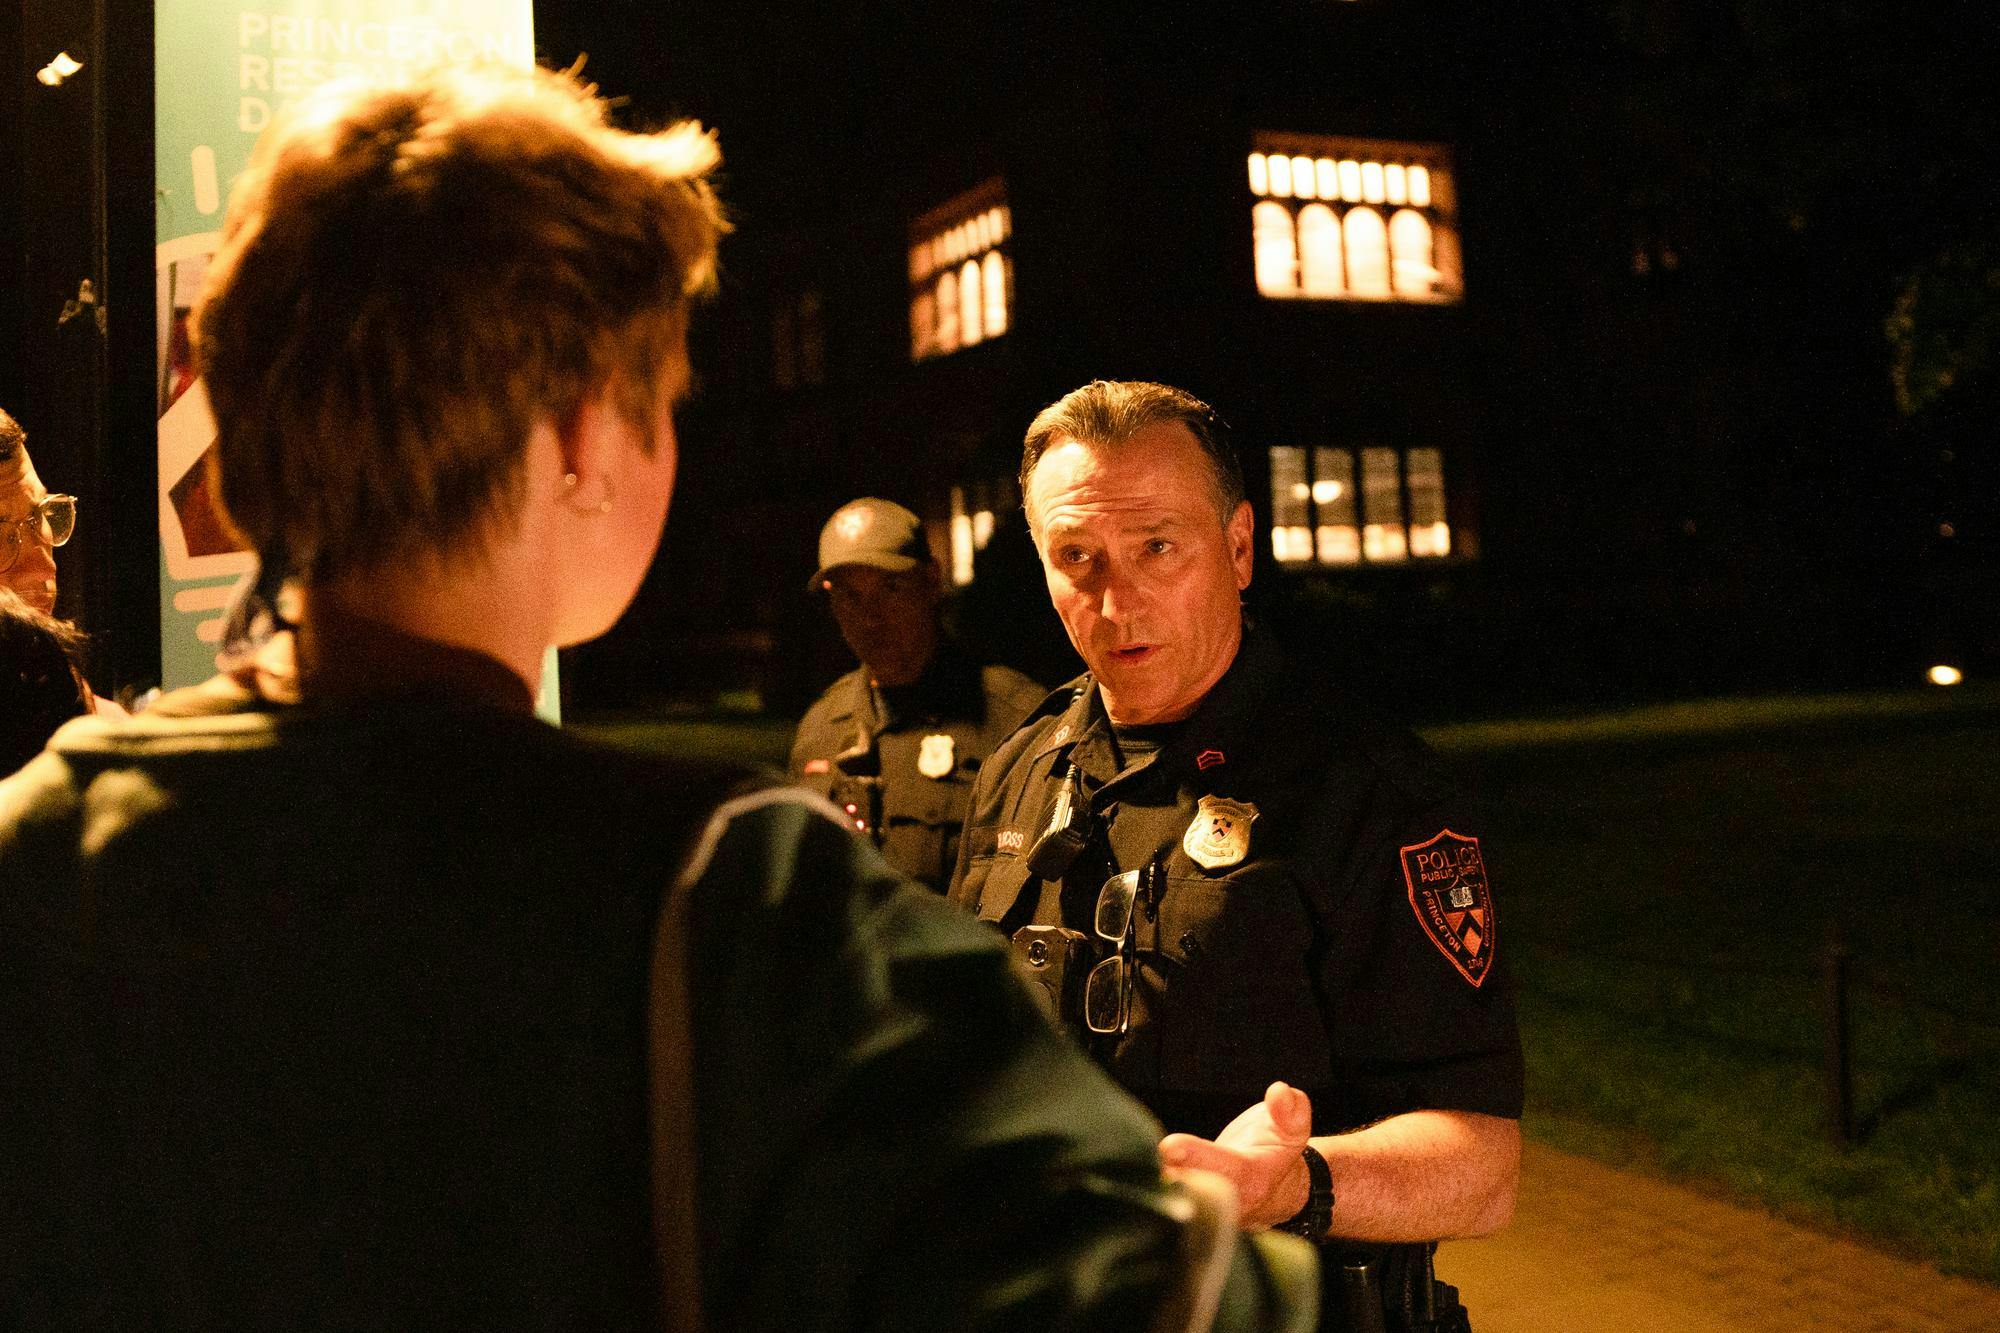 At night, a PSAFE officer in a black and orange uniform interacts with a marshal with orange hair.